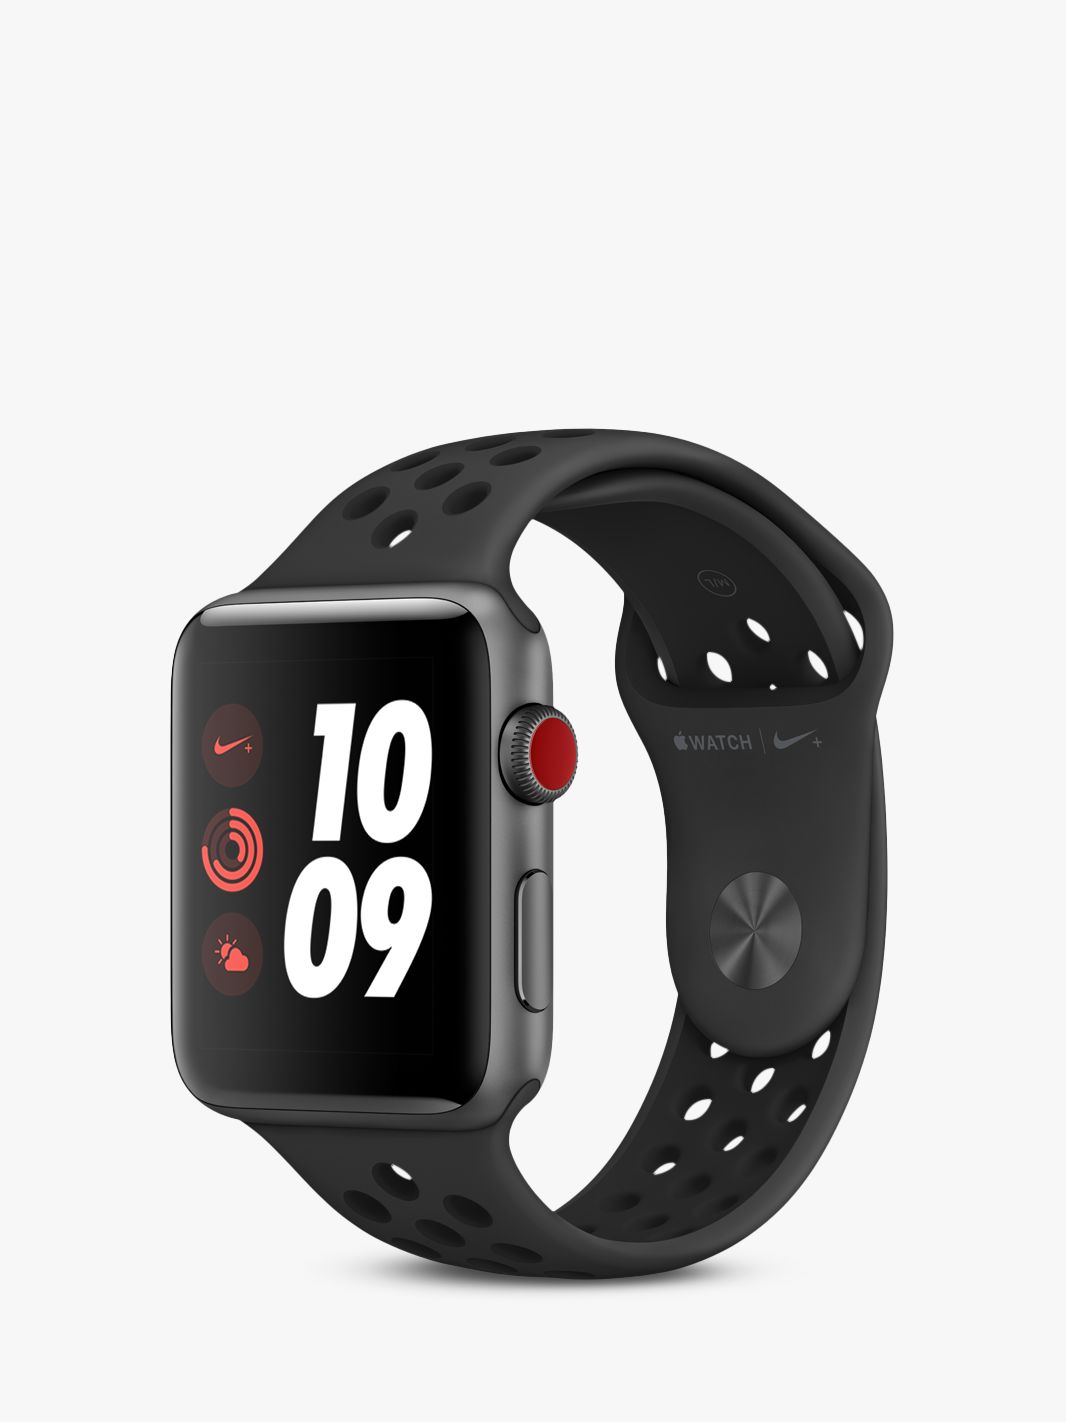 Asombrosamente adverbio Intensivo Apple Watch Nike+ Series 3, GPS and Cellular, 42mm Space Grey Aluminium  Case with Nike Sport